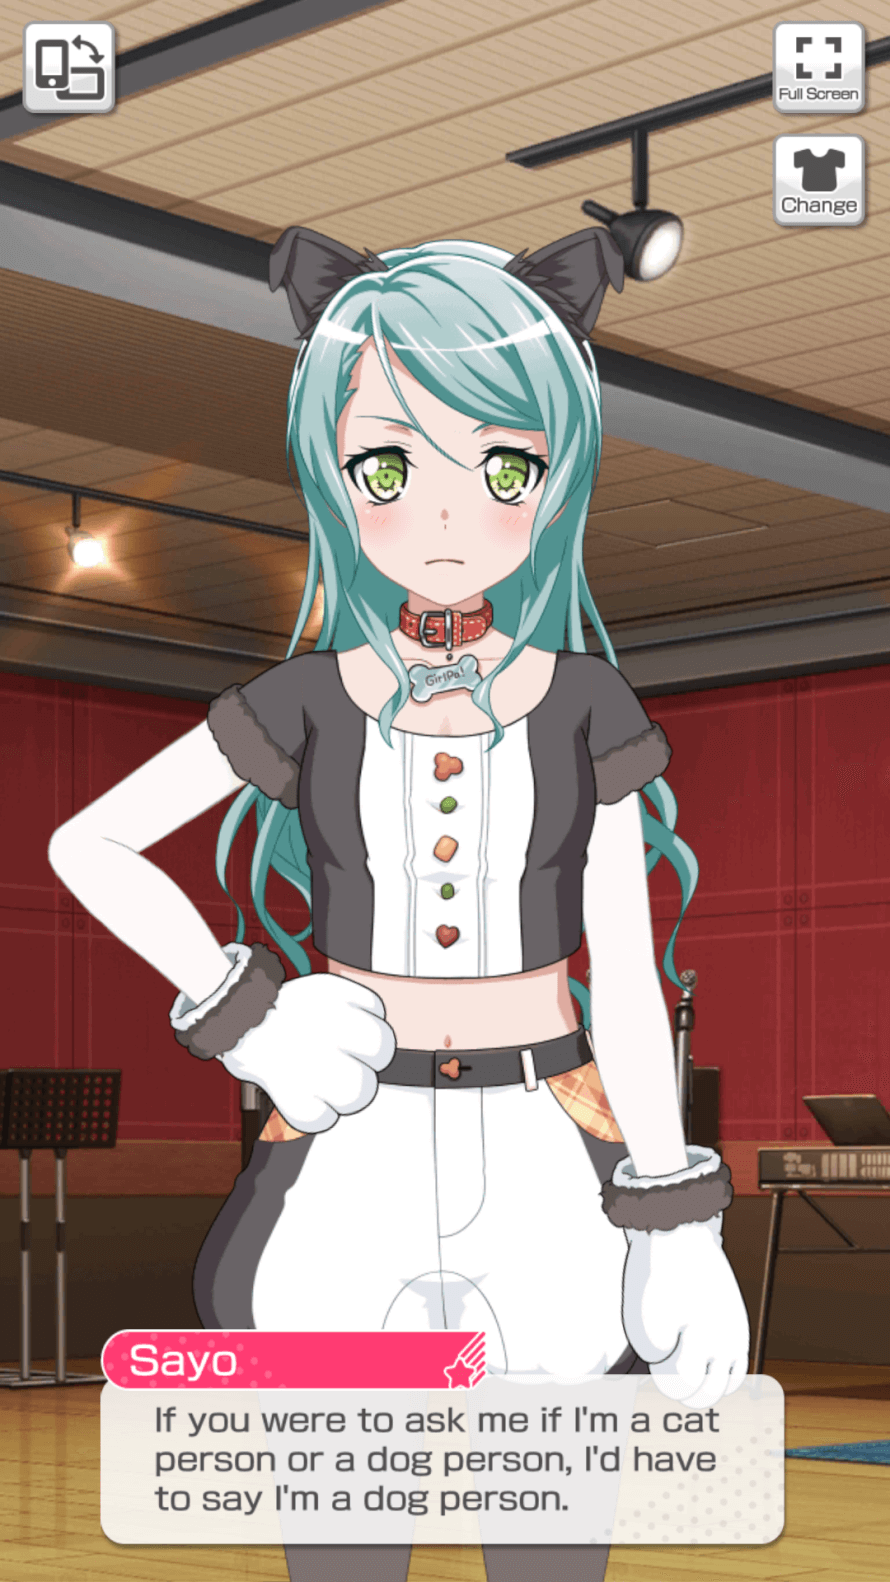 Yeah I can definitely see that, Sayo